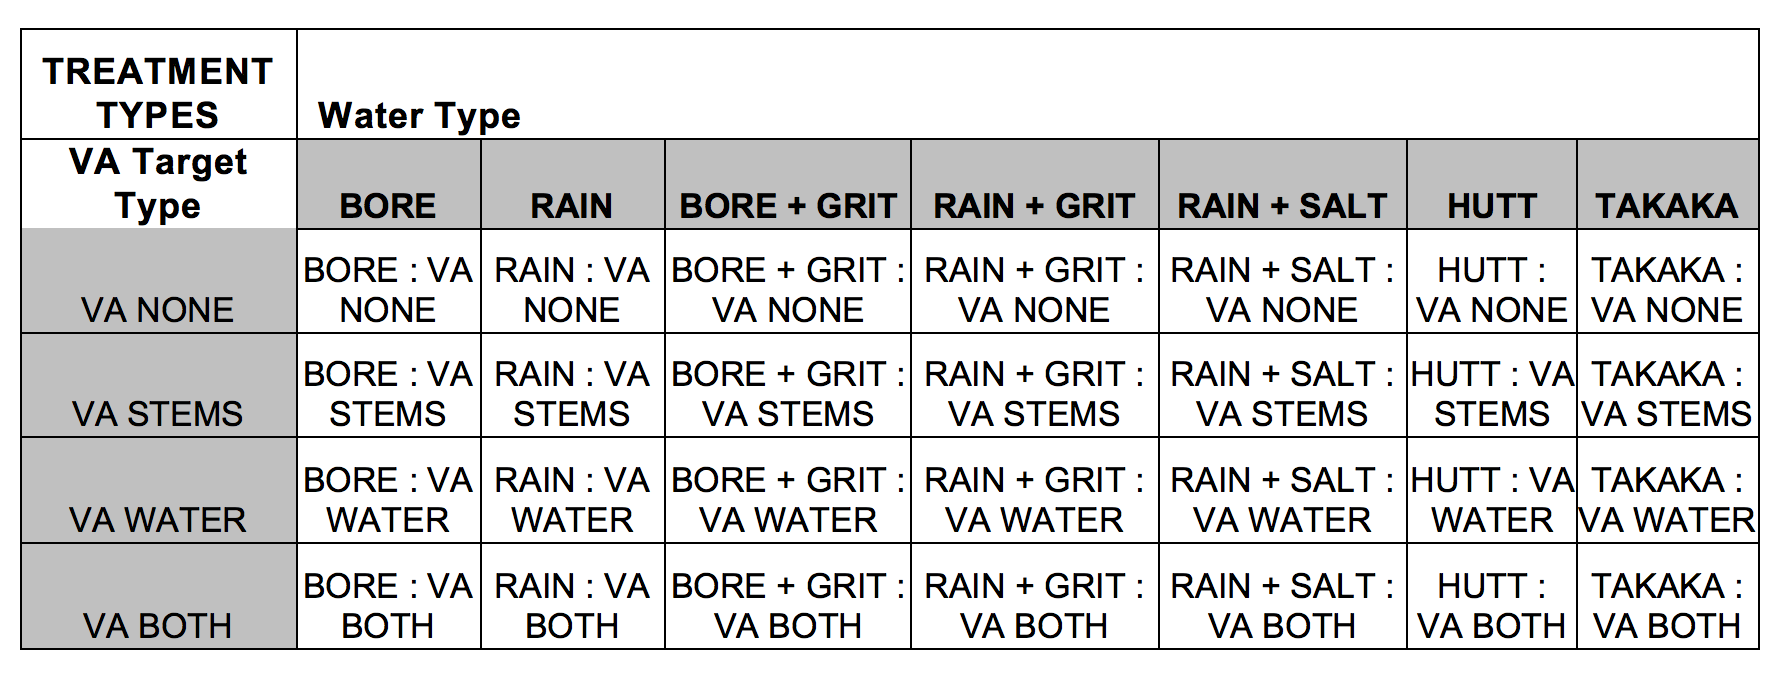 Table 1. List of Experimental Treatments, defined by Water Type and VA Target Type